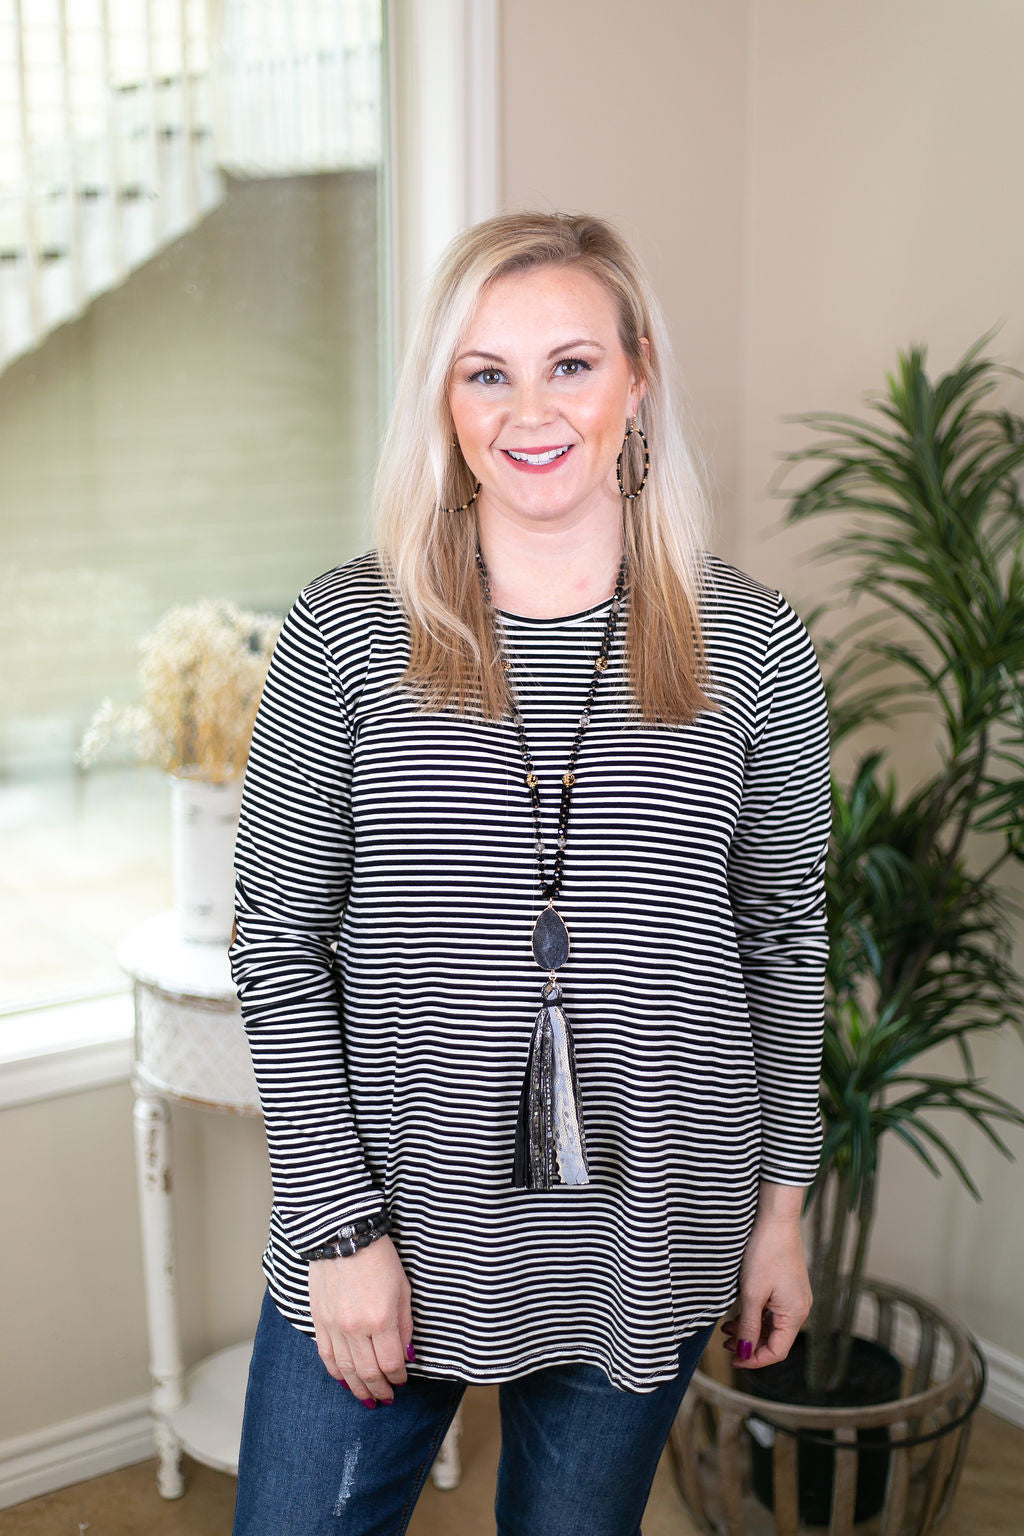 A Different Day Long Sleeve Striped Top with Suede Elbow Patches in Black and White - Giddy Up Glamour Boutique